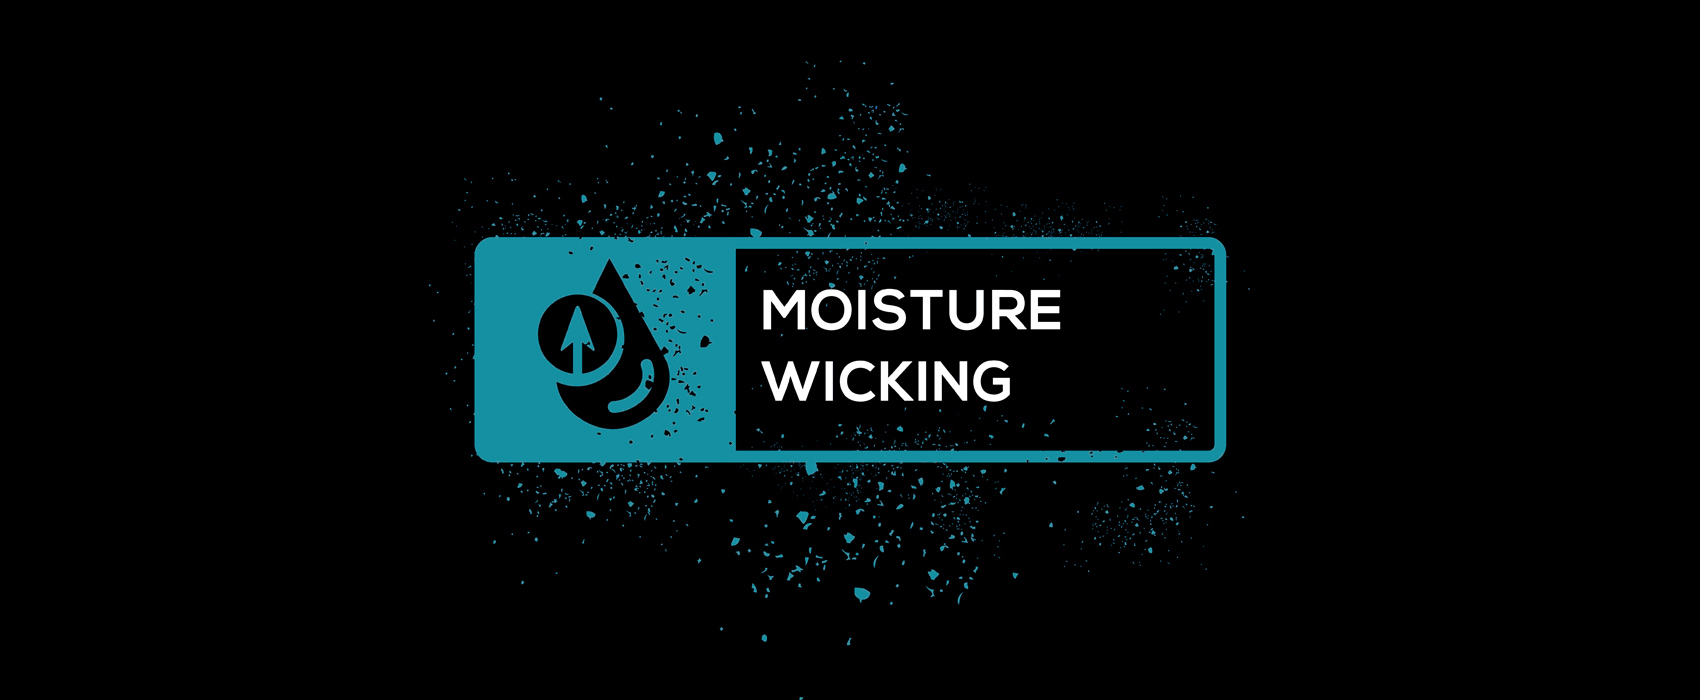 Moisture wicking: why sweat proof tech doesn't just belong on